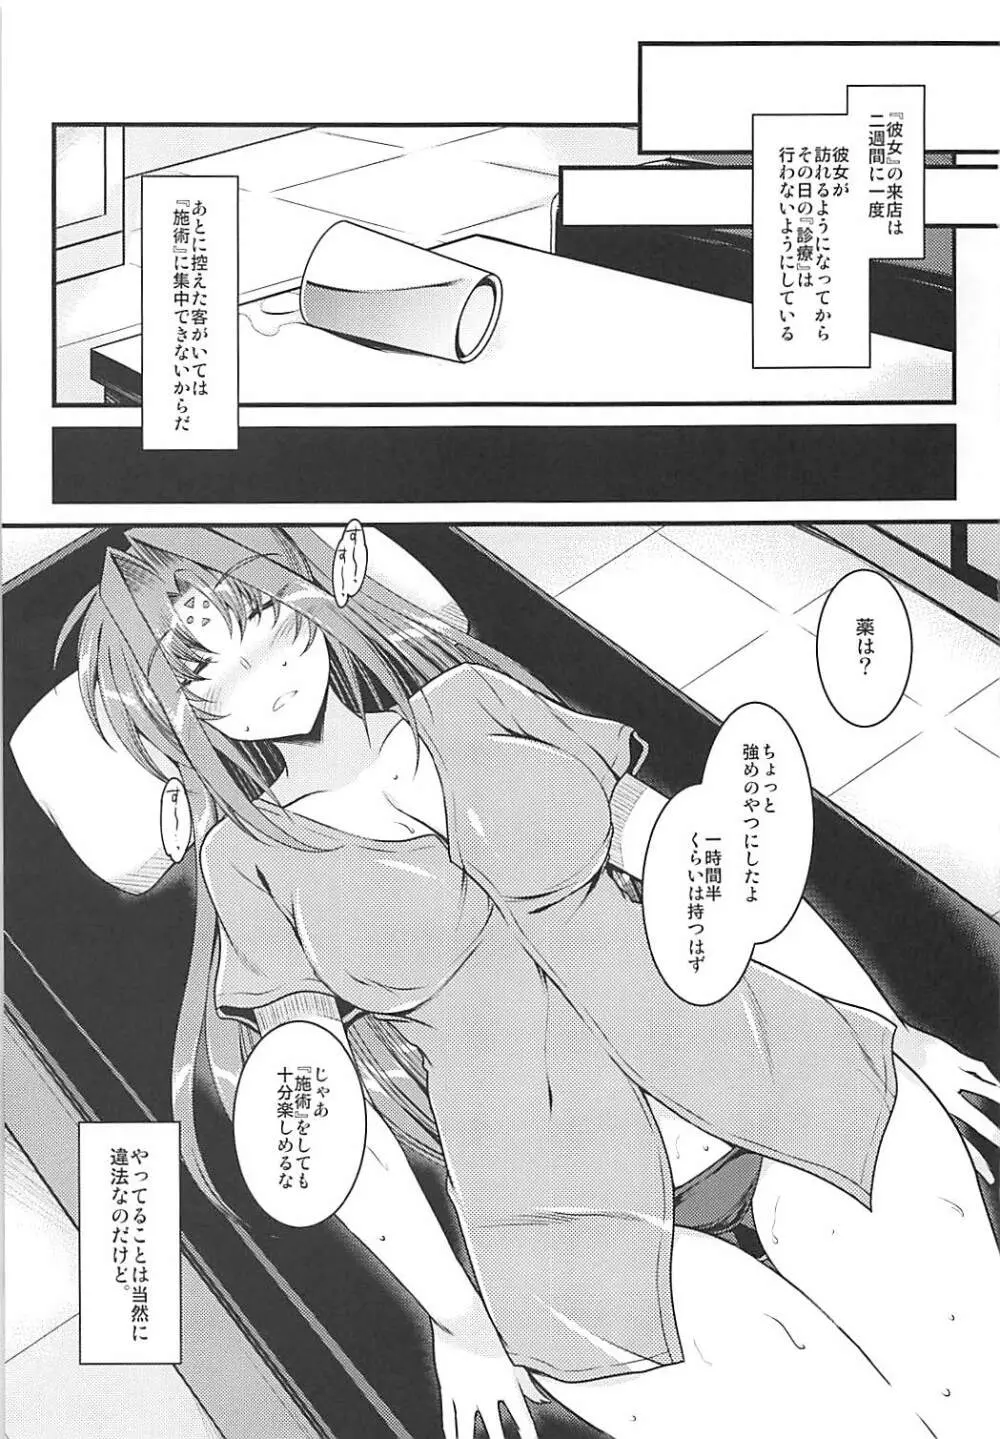 EXT×END 02 Page.2